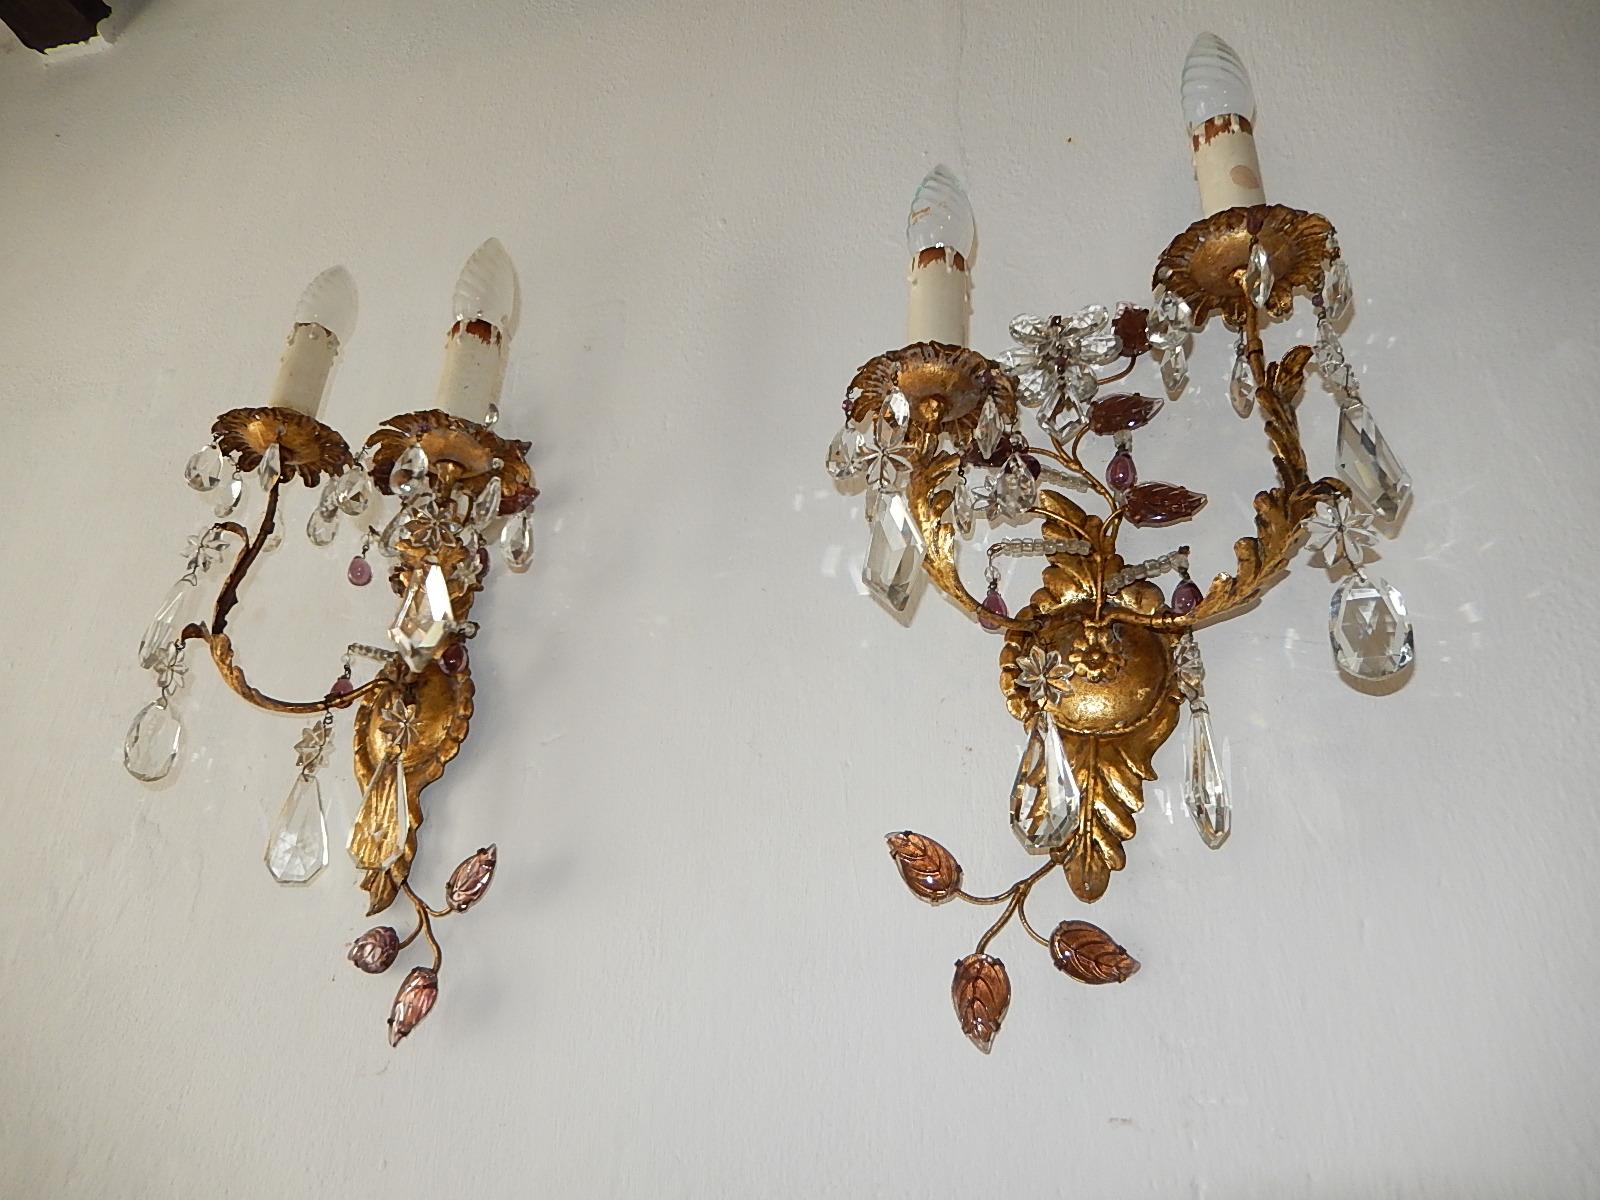 Housing two lights each. Rewired and ready to hang. Gilt metal with clear and amethyst beads. Crystal prisms, flowers and stars. Amethyst leaves and drops. Beading on stem. Free priority shipping from Italy.